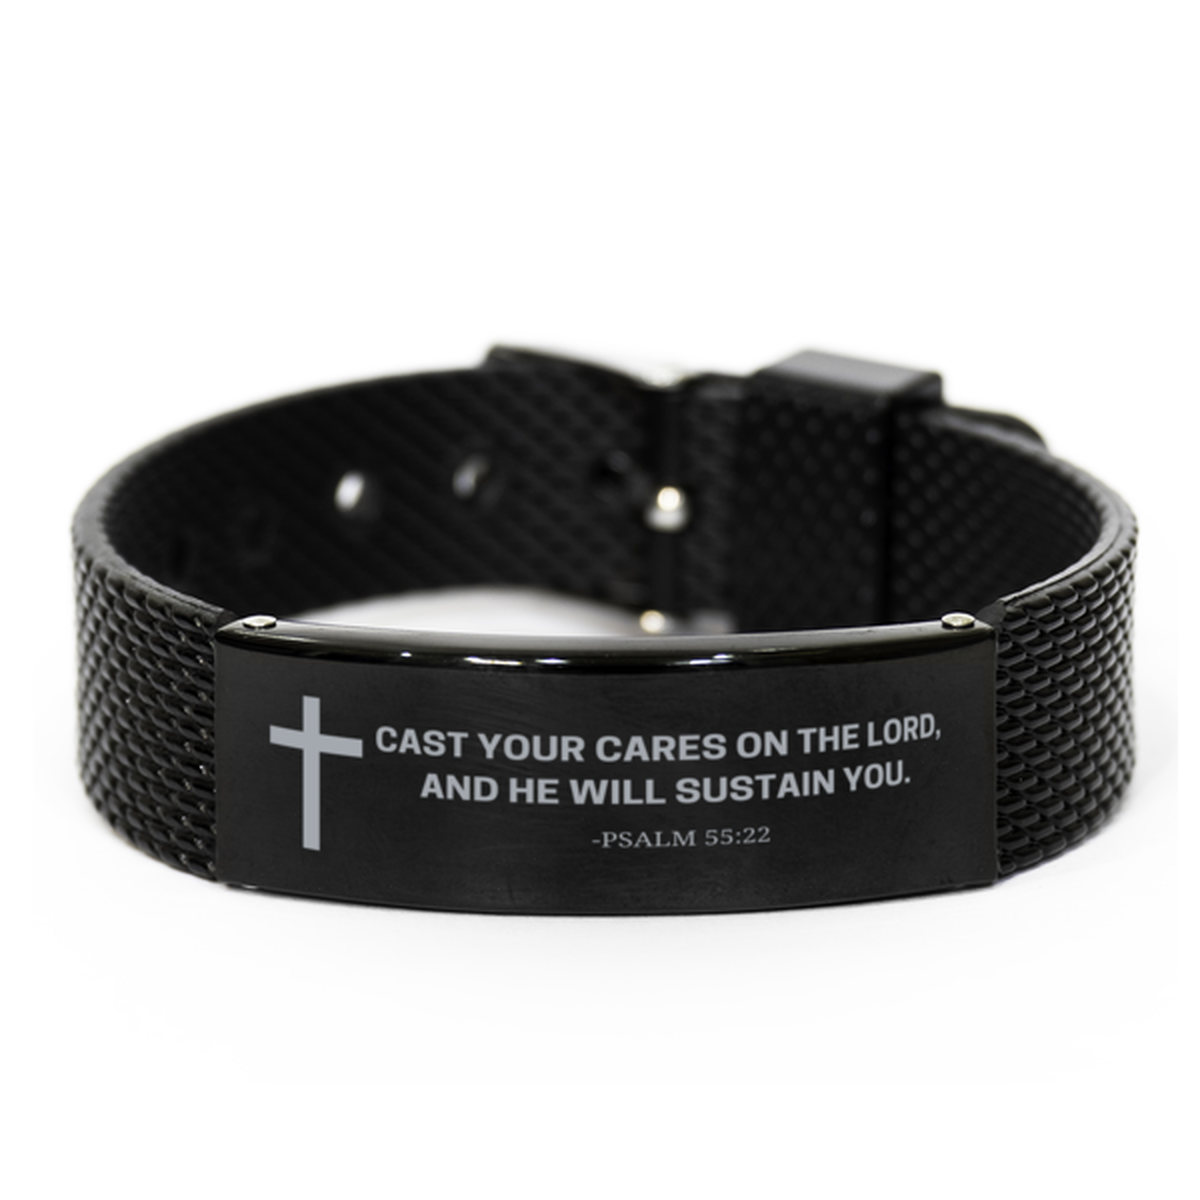 Baptism Gifts For Teenage Boys Girls, Christian Bible Verse Black Shark Mesh Bracelet, Cast your cares on the Lord, Catholic Confirmation Gifts for Son, Godson, Grandson, Nephew